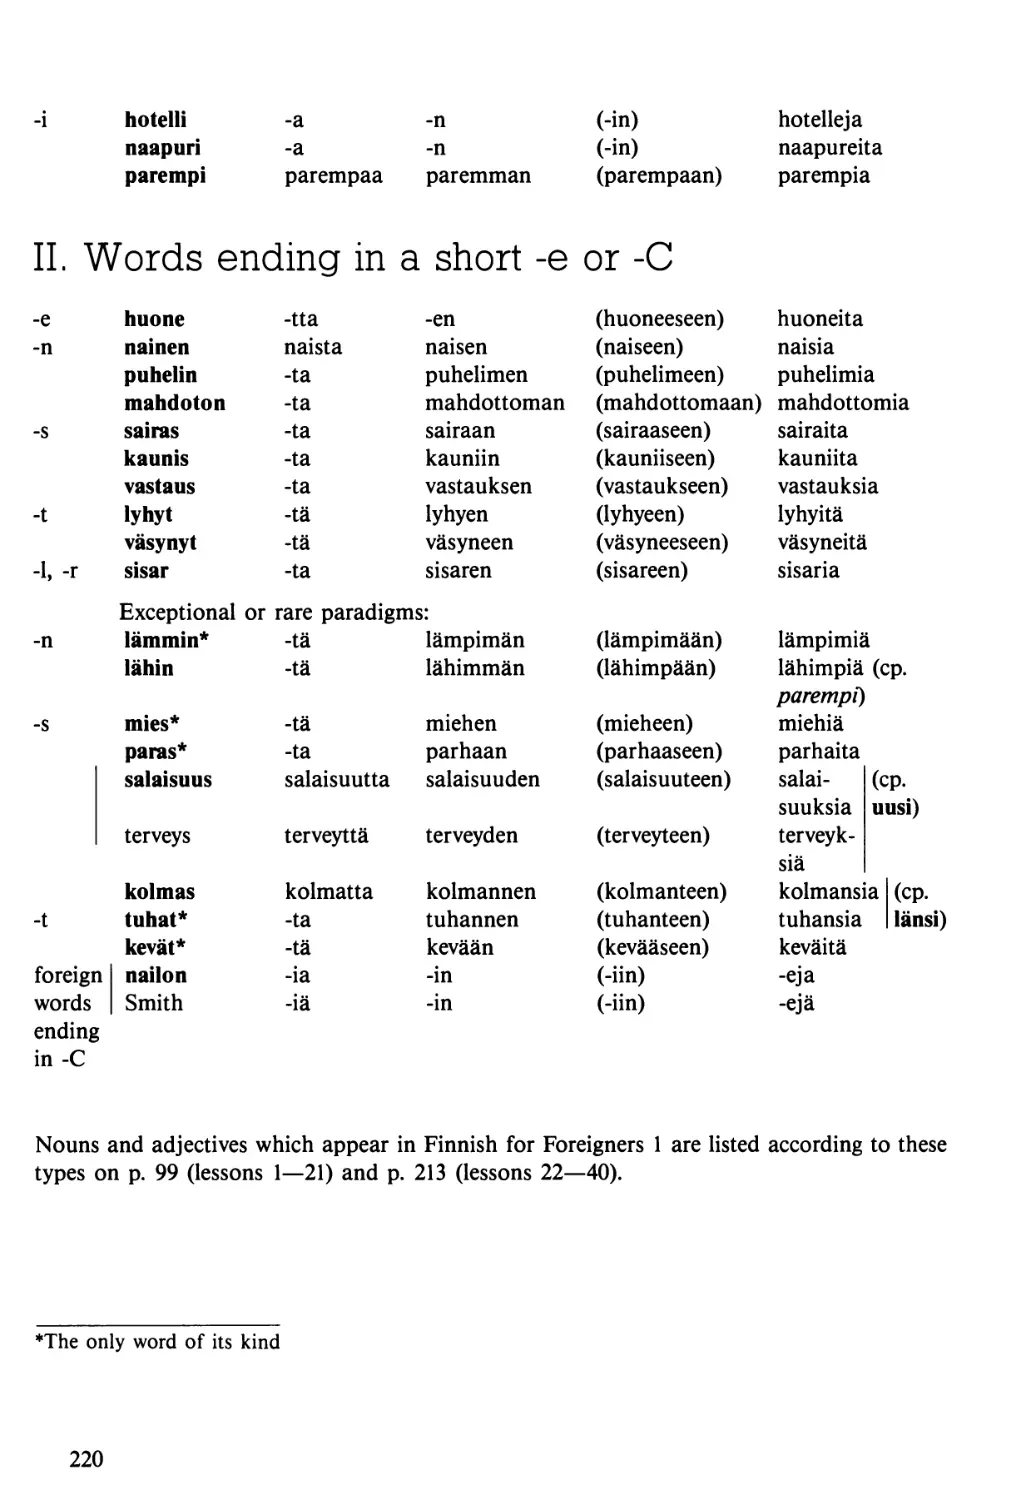 II. Words ending in a short -e or -C